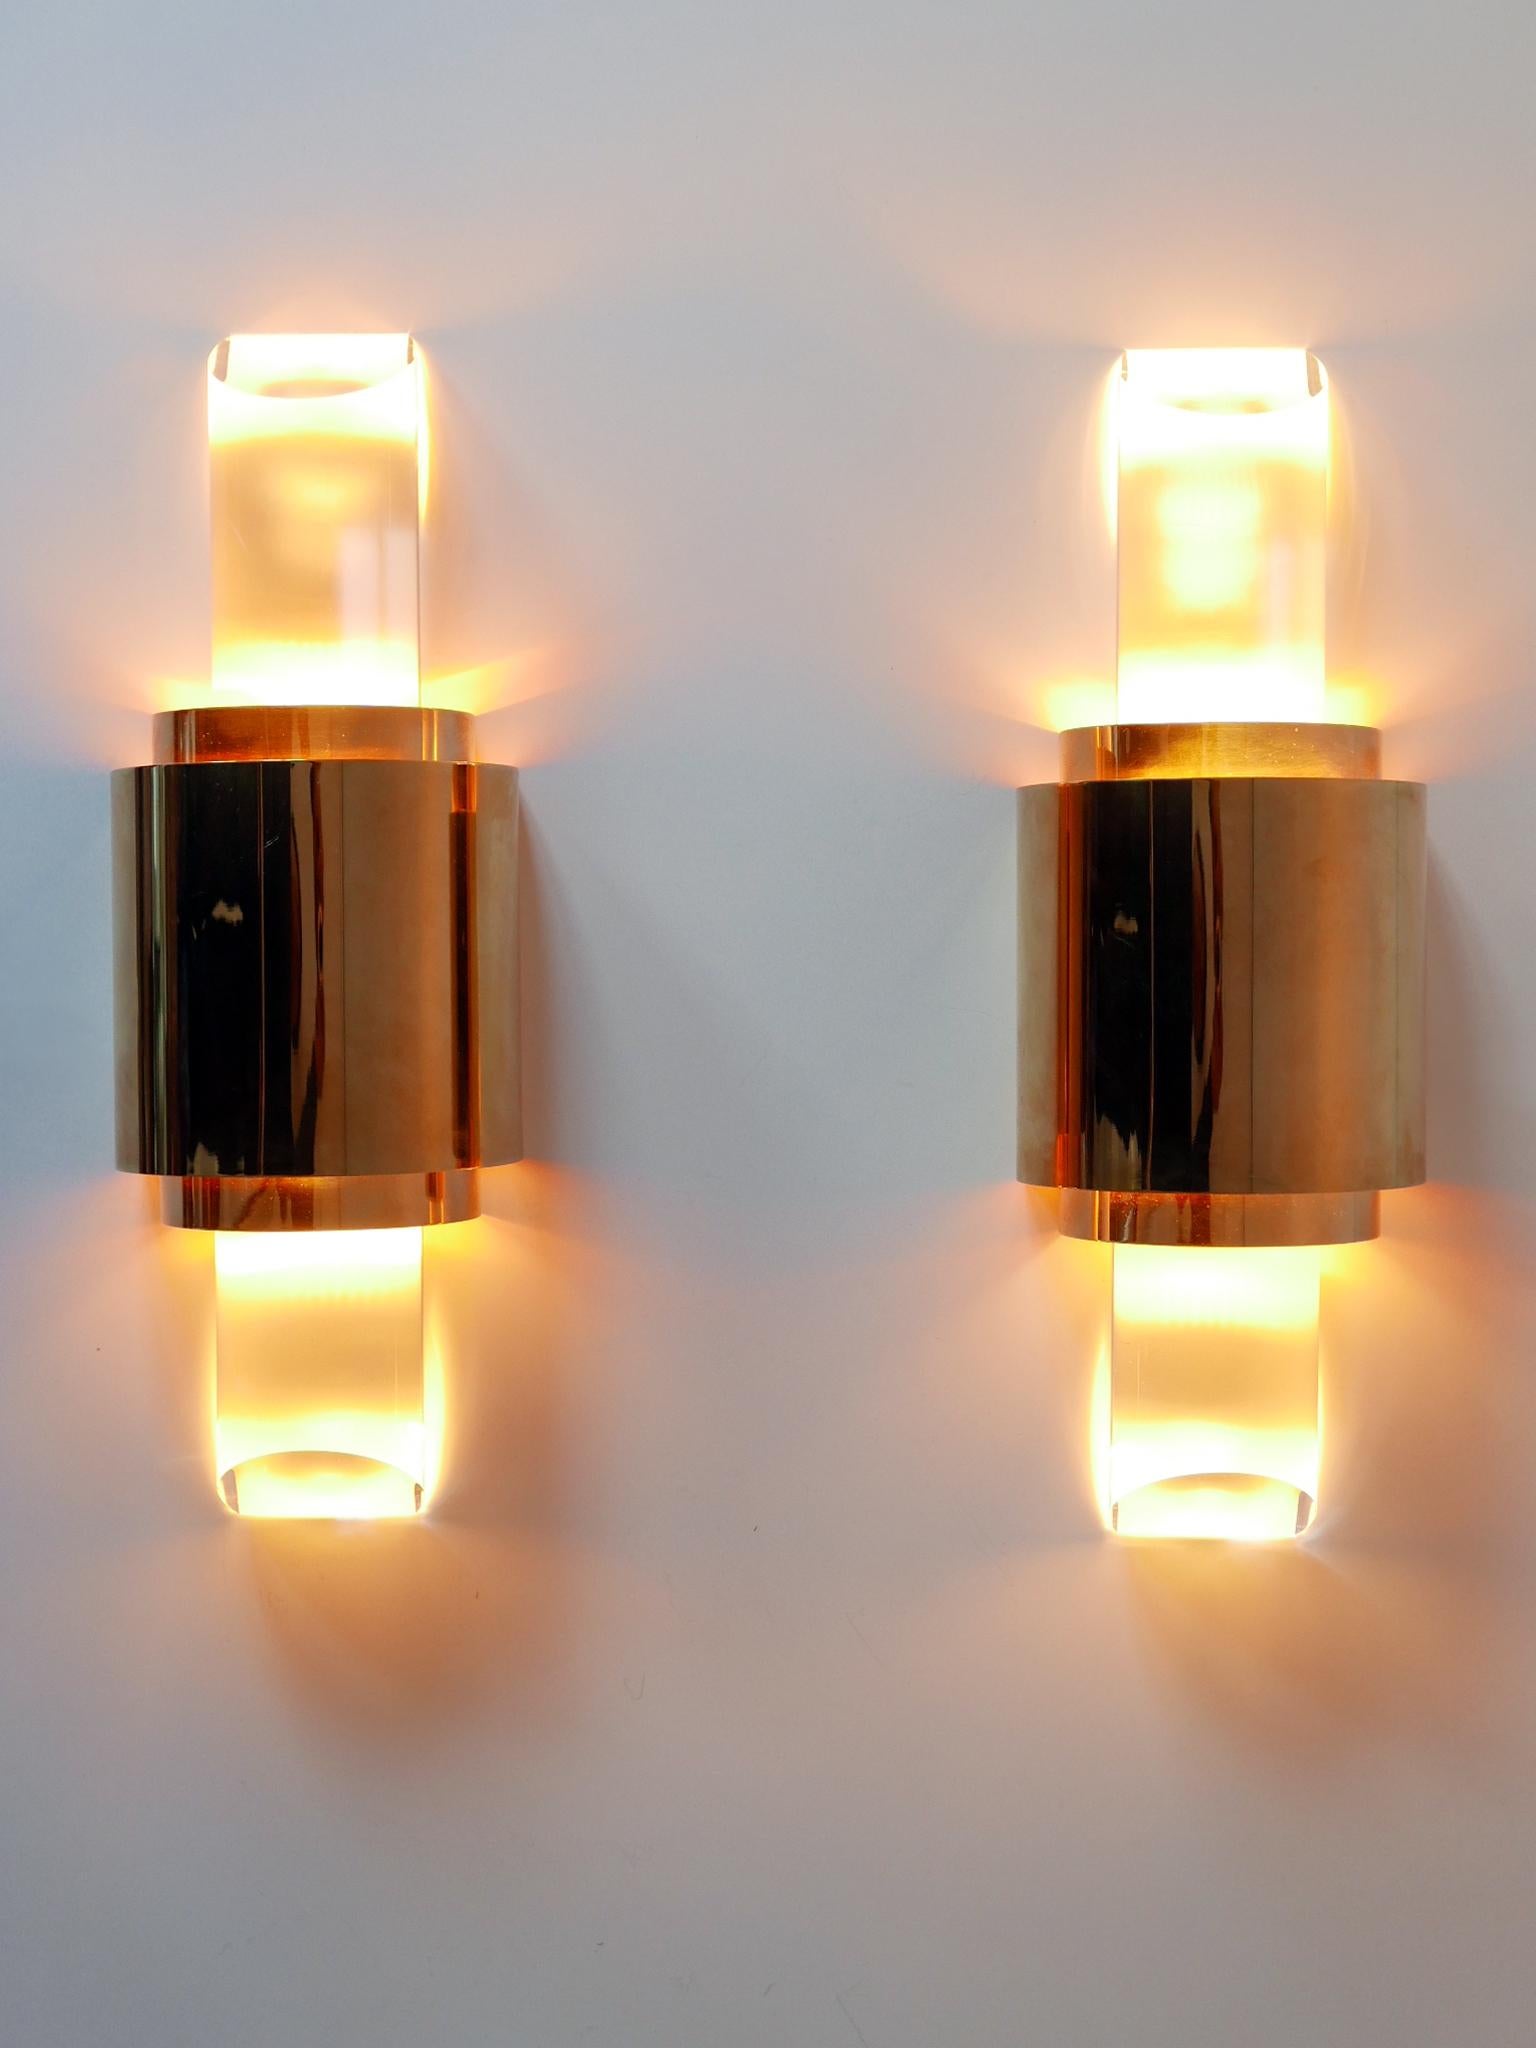 Set of two exceptional and elegant Mid-Century Modern gilt brass and lucite sconces or wall fixtures. Solid and high quality products. Designed & manufactured in Germany, 1980s.

Executed in gilt brass and lucite, each fixture needs 1 x R7 halogen /